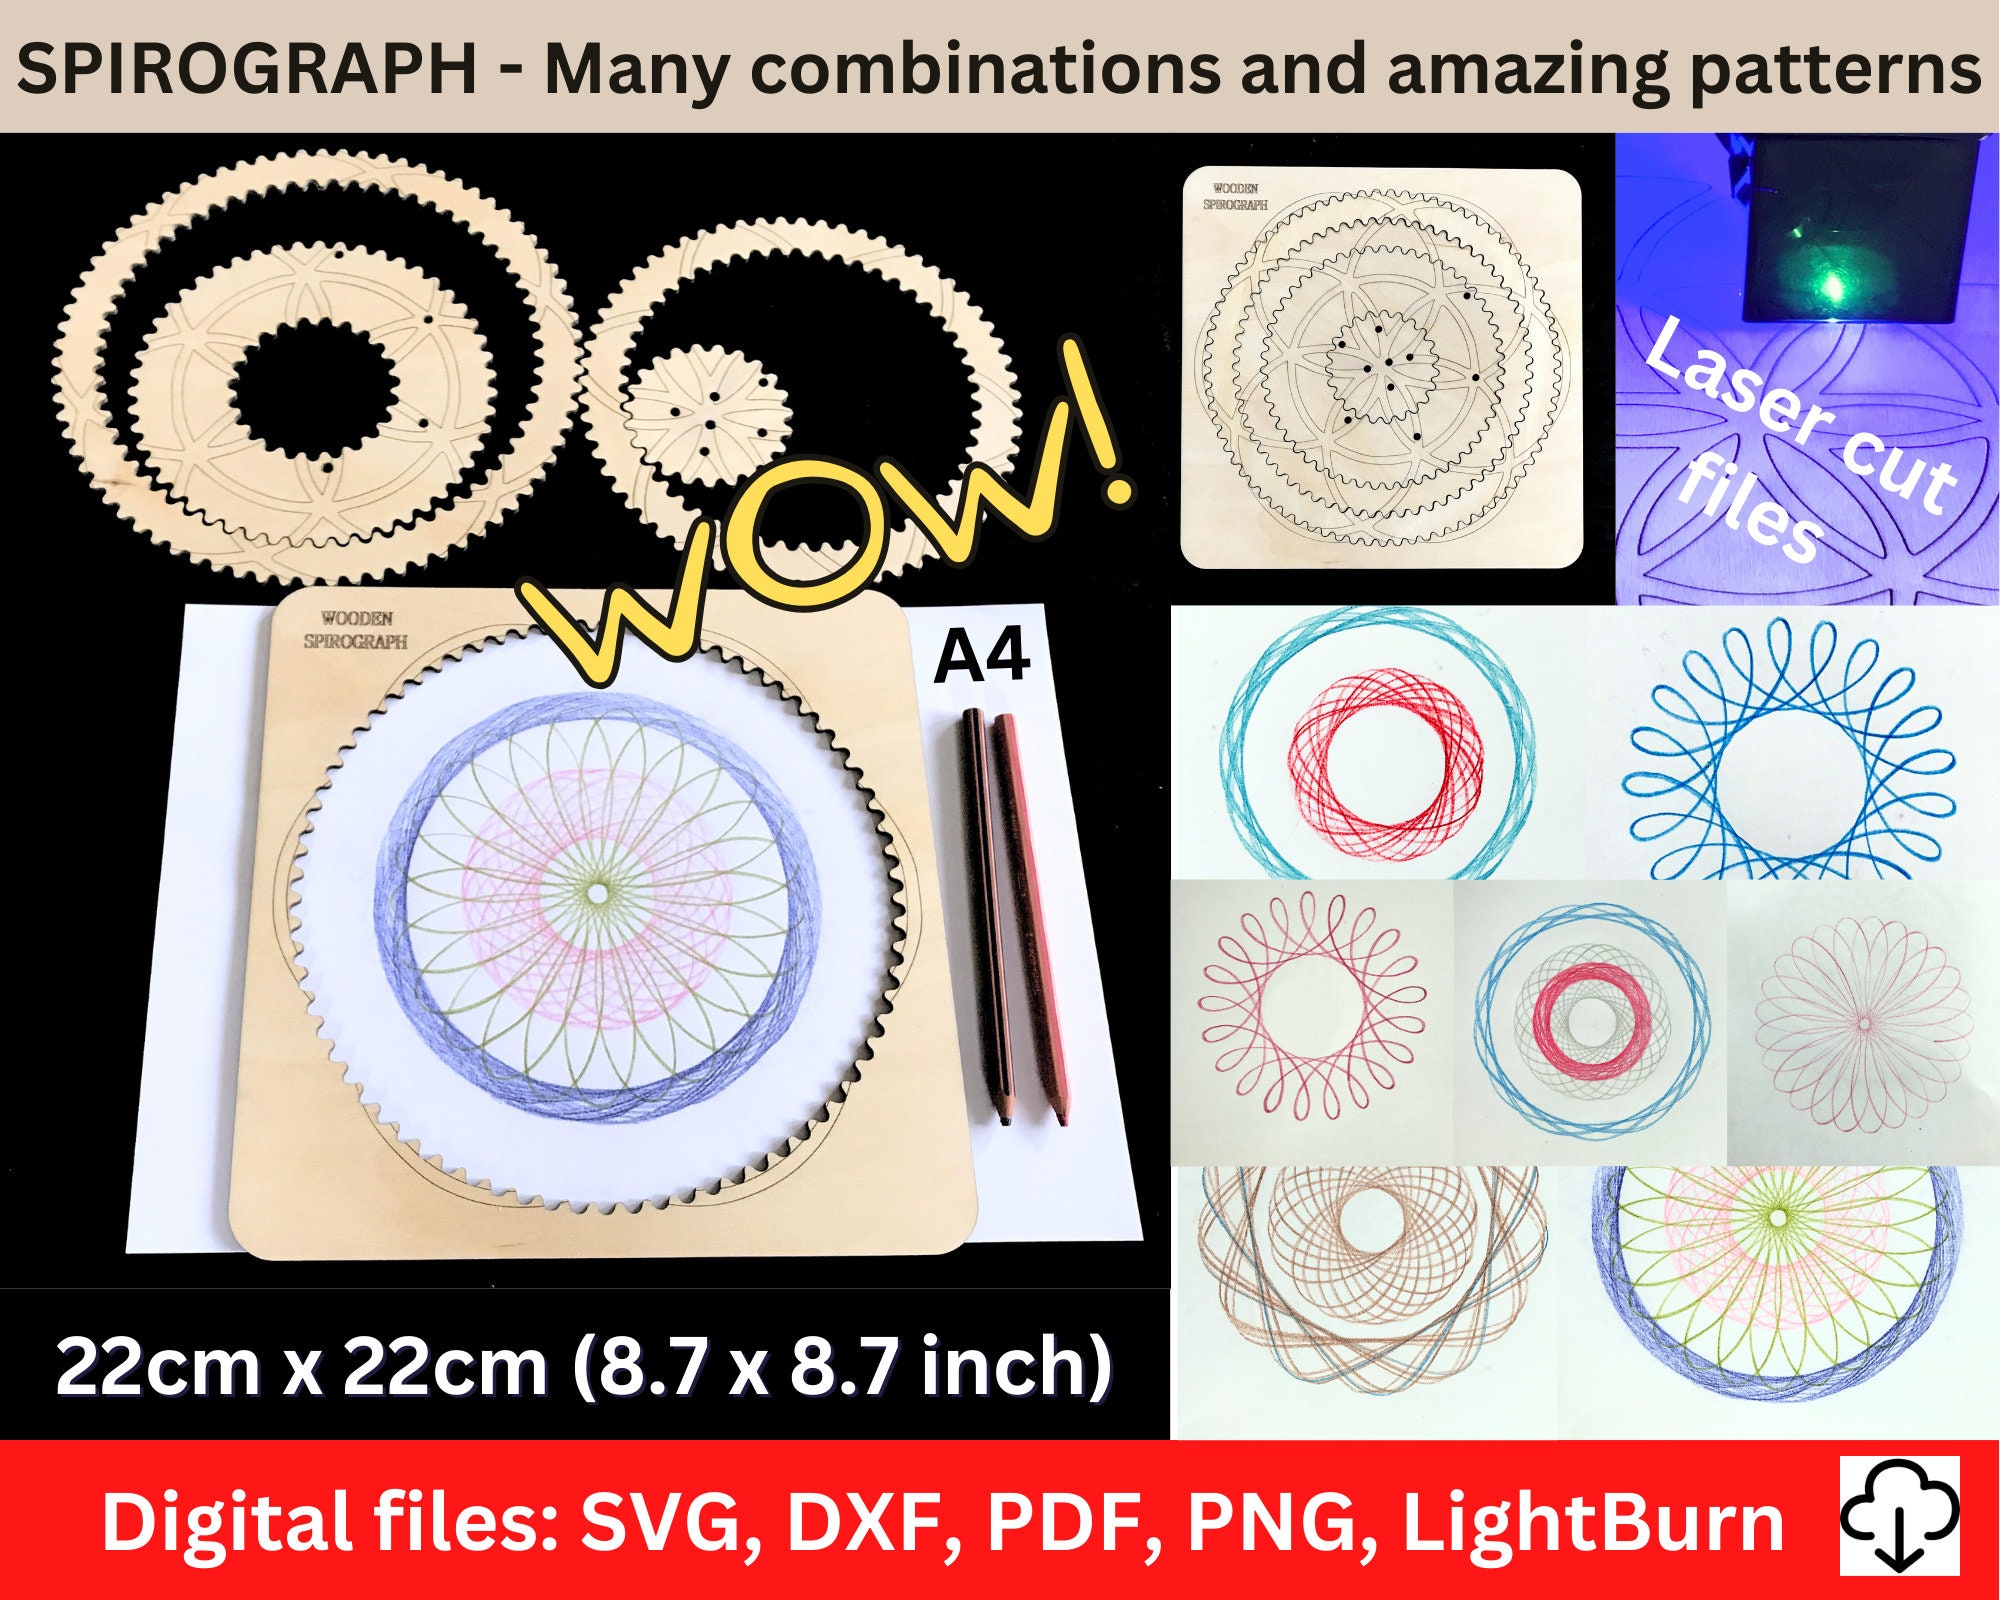 Spirograph deluxe set NIB - Lil Dusty Online Auctions - All Estate  Services, LLC